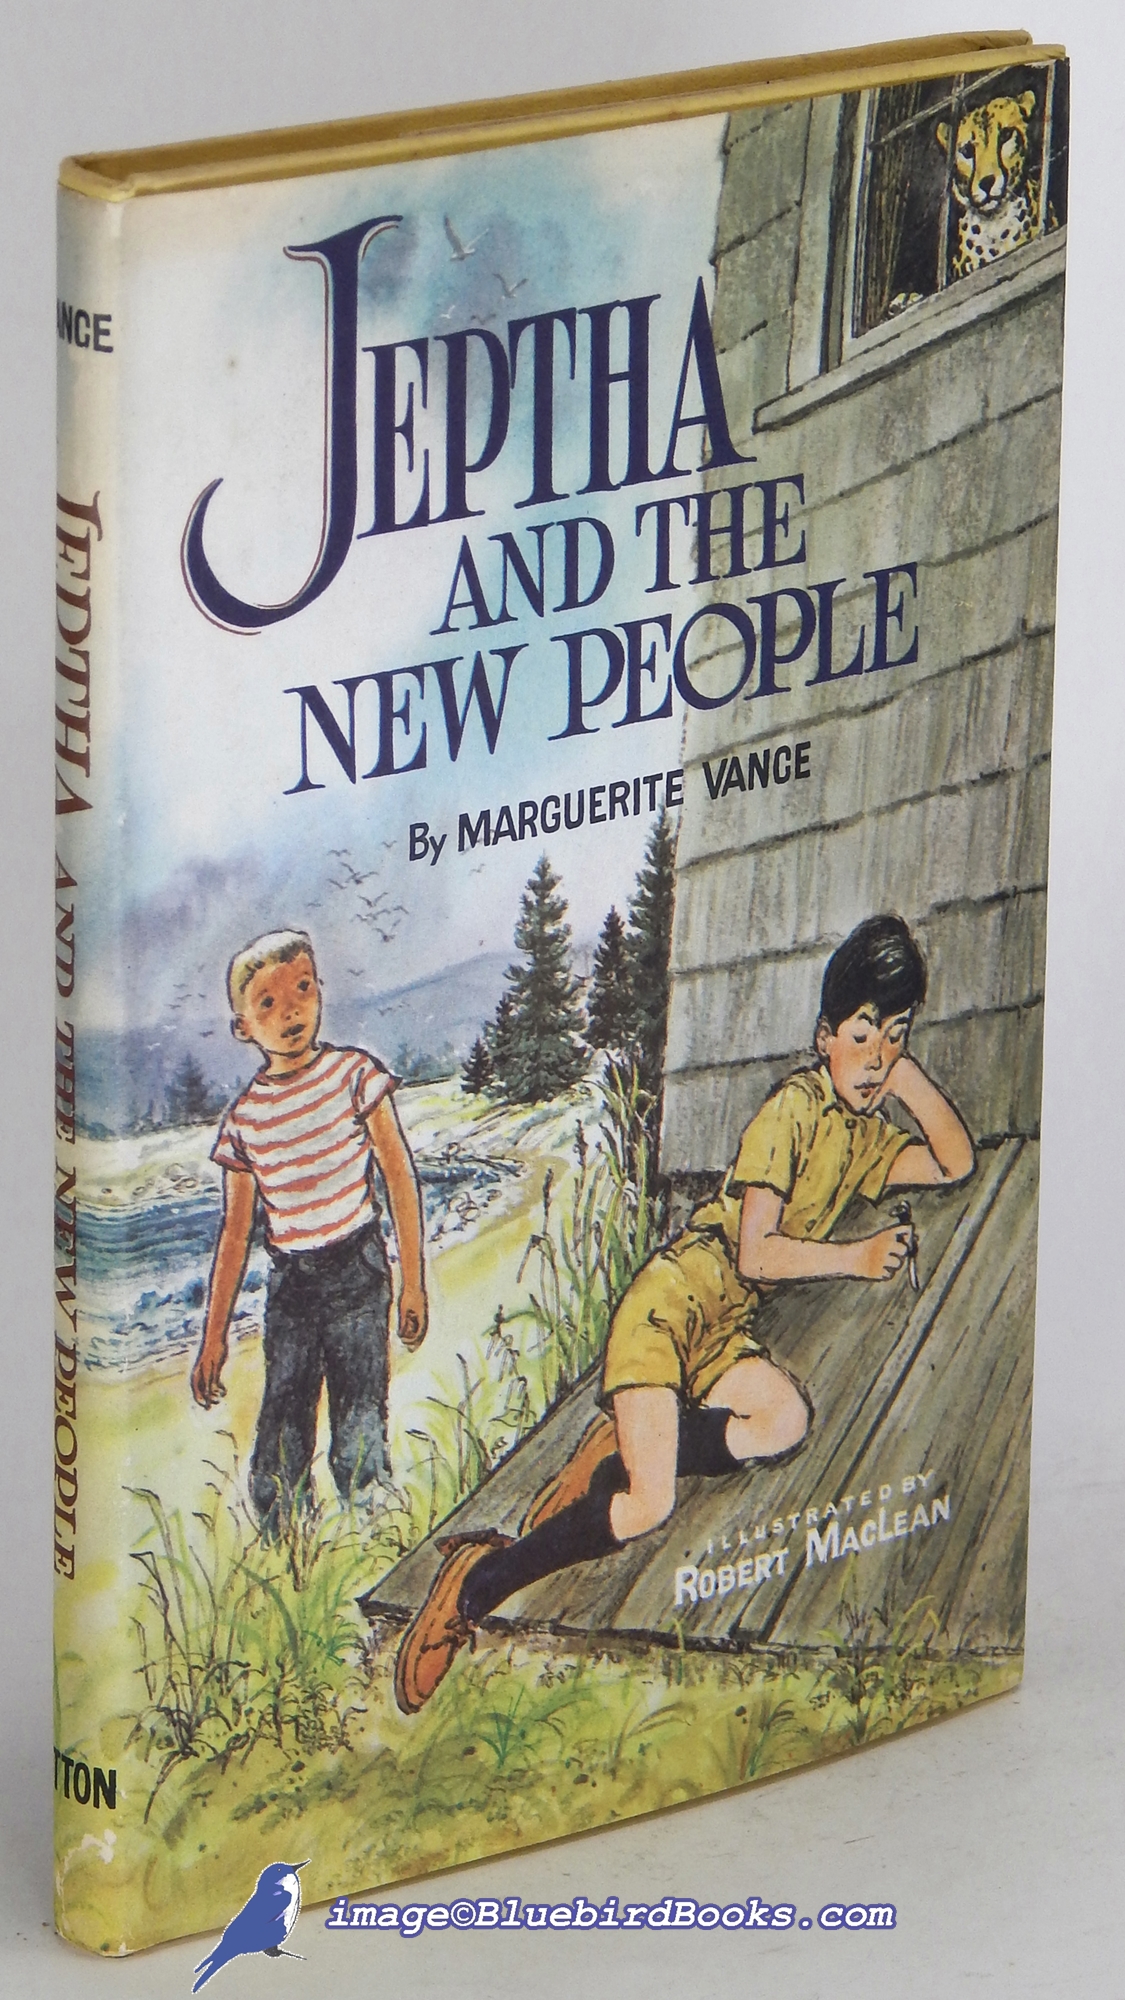 VANCE, MARGUERITE - Jeptha and the New People